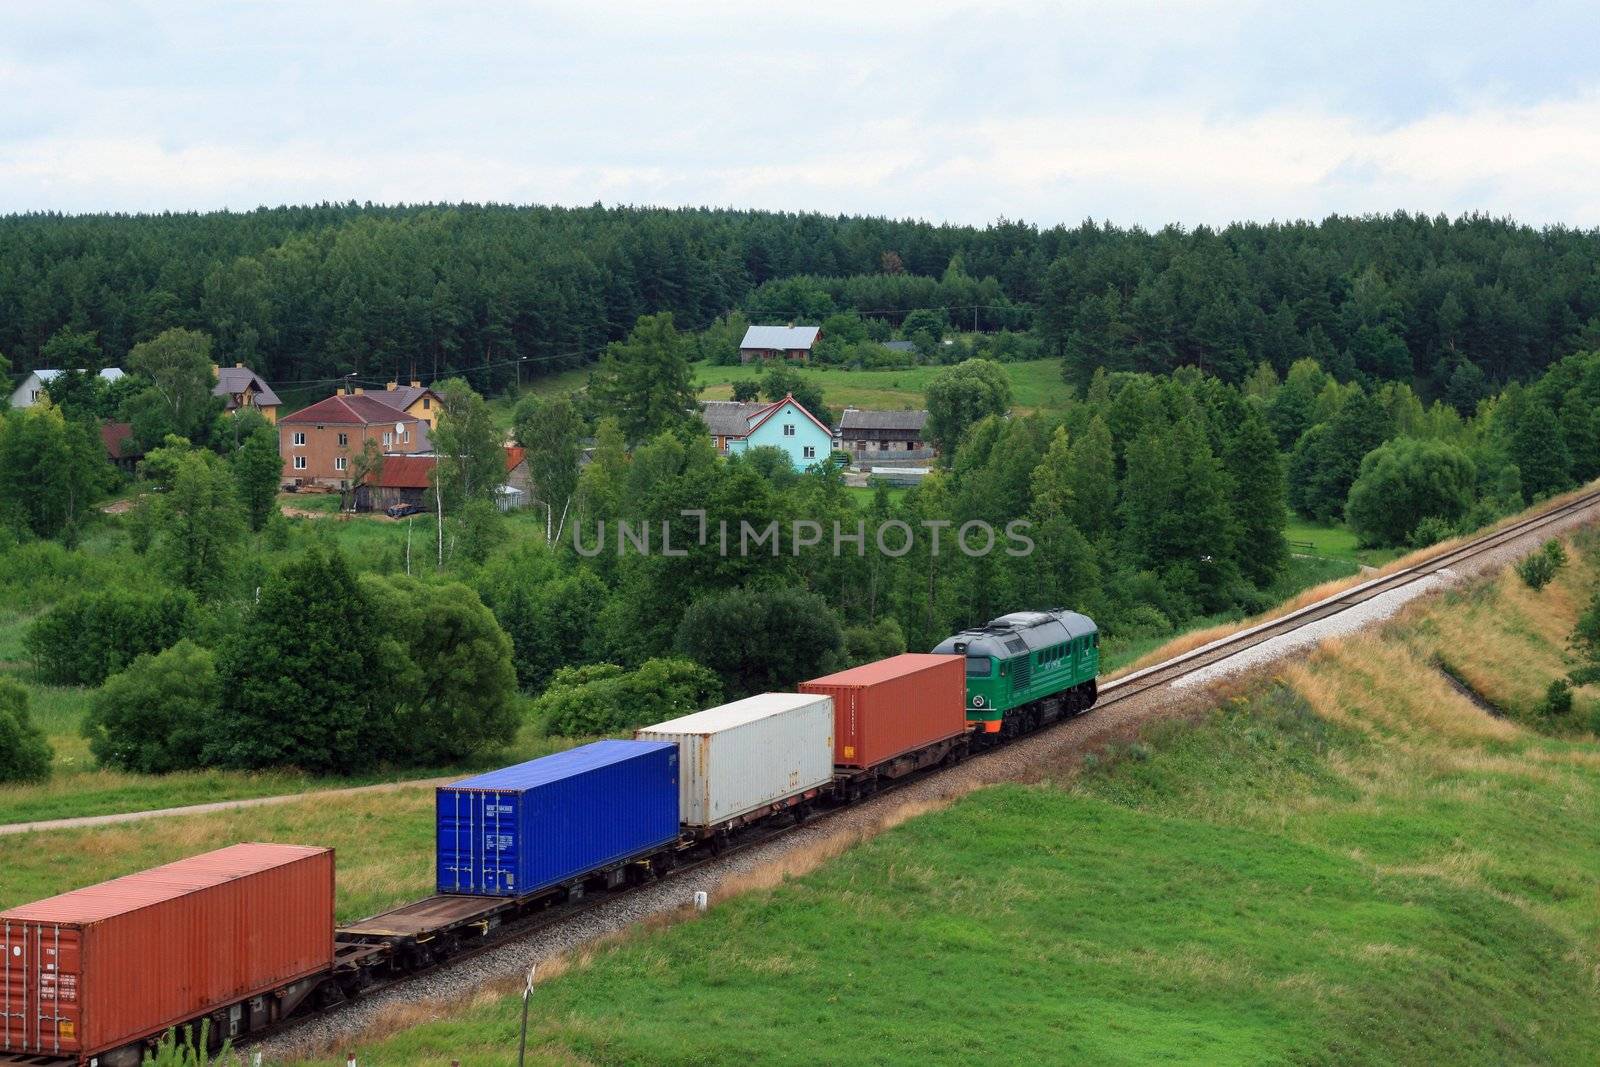 Landscape for container train passing the village